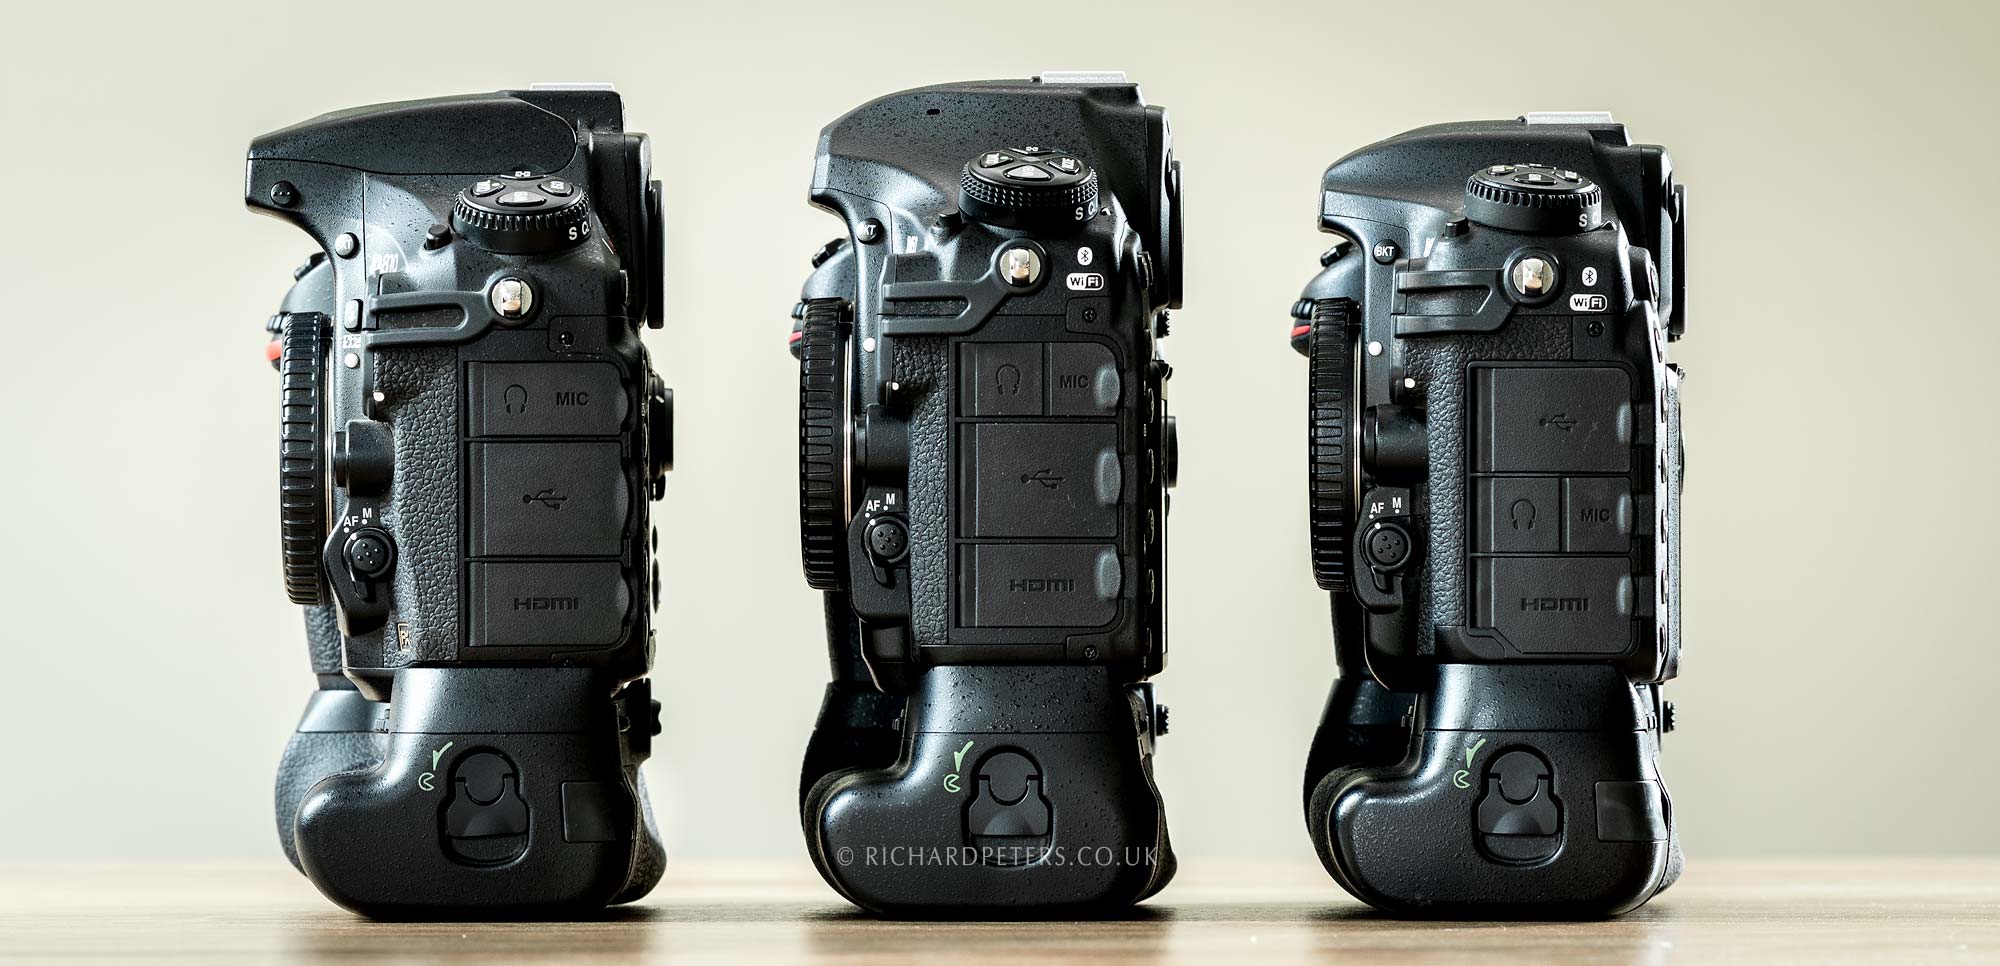 D850 compared to the D810 and D500